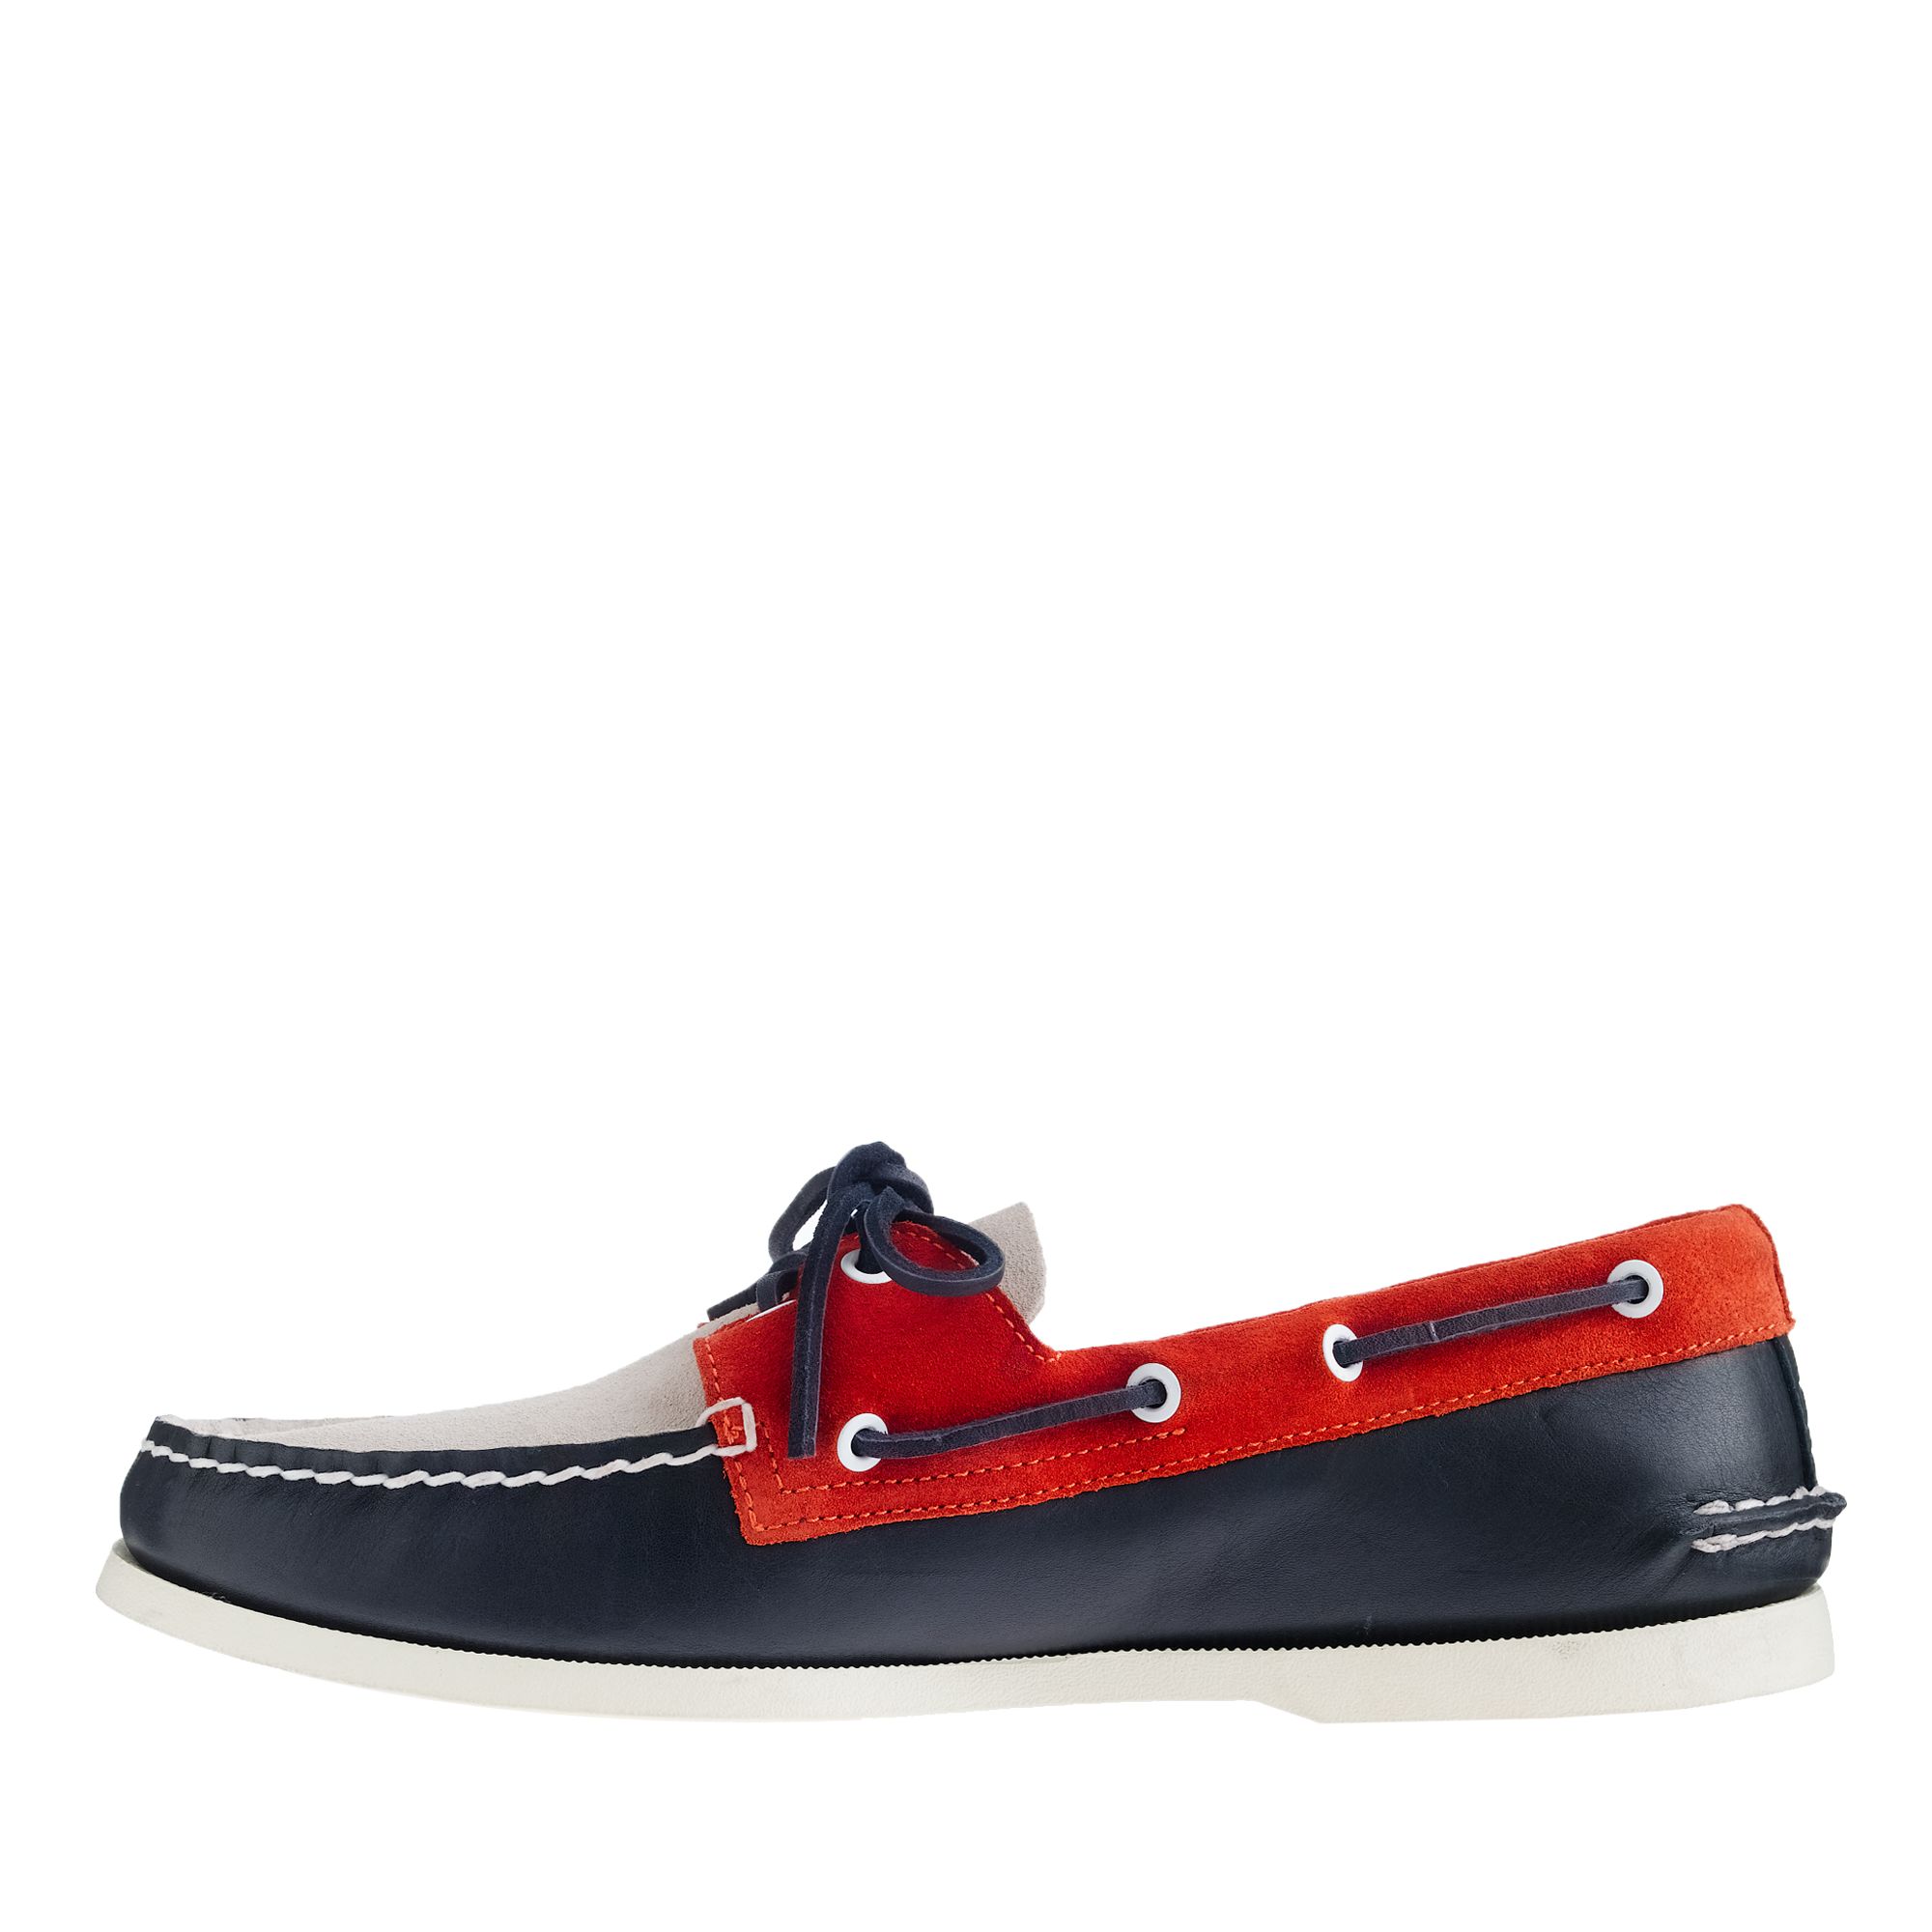 J.crew Sperry Topsider For Jcrew Authentic Original Leather and Suede ...